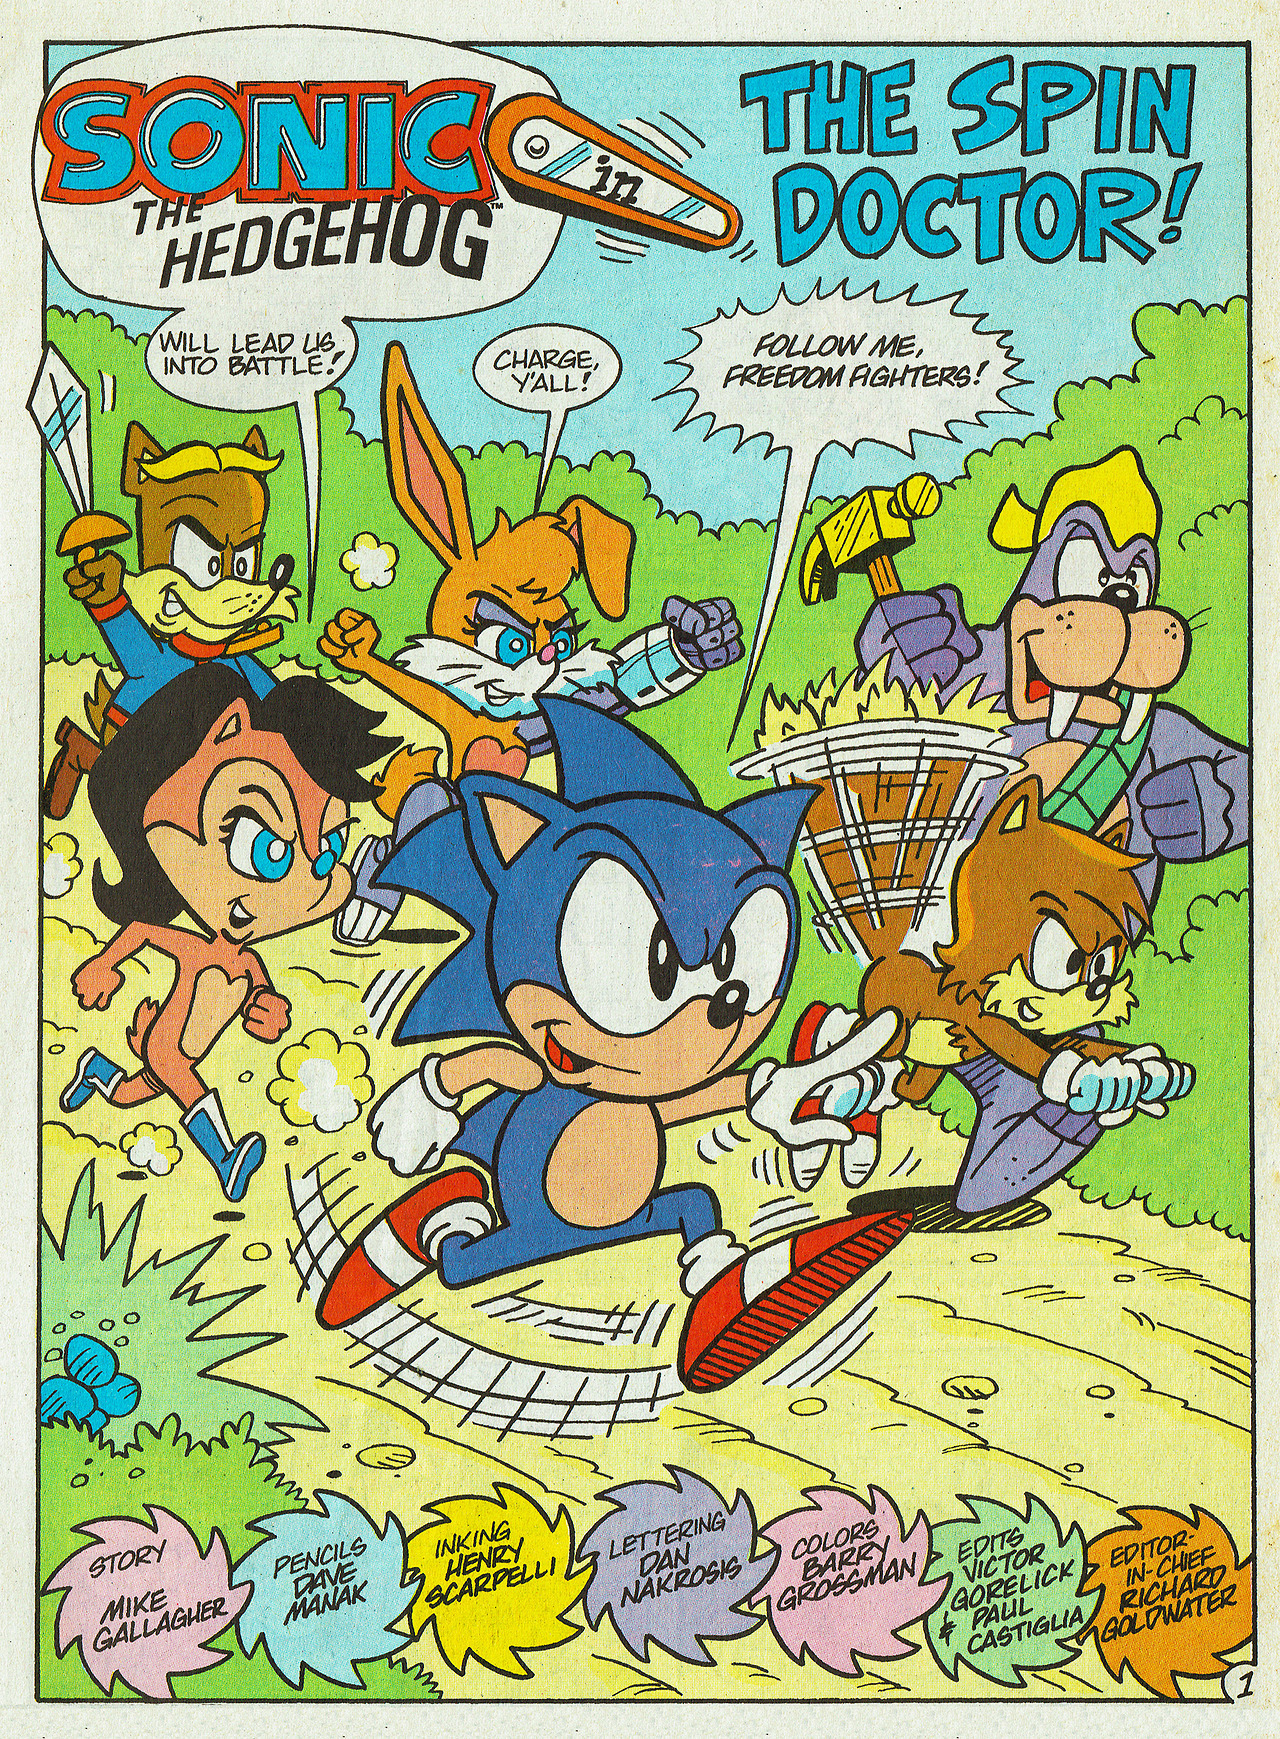 Sonic The Hedgeblog on X: Mighty The Armadillo's introduction panel from  Archie Comic's 'Knuckles Chaotix' 48 page special. [@Sonic_Hedgeblog]  [Patreon]   / X